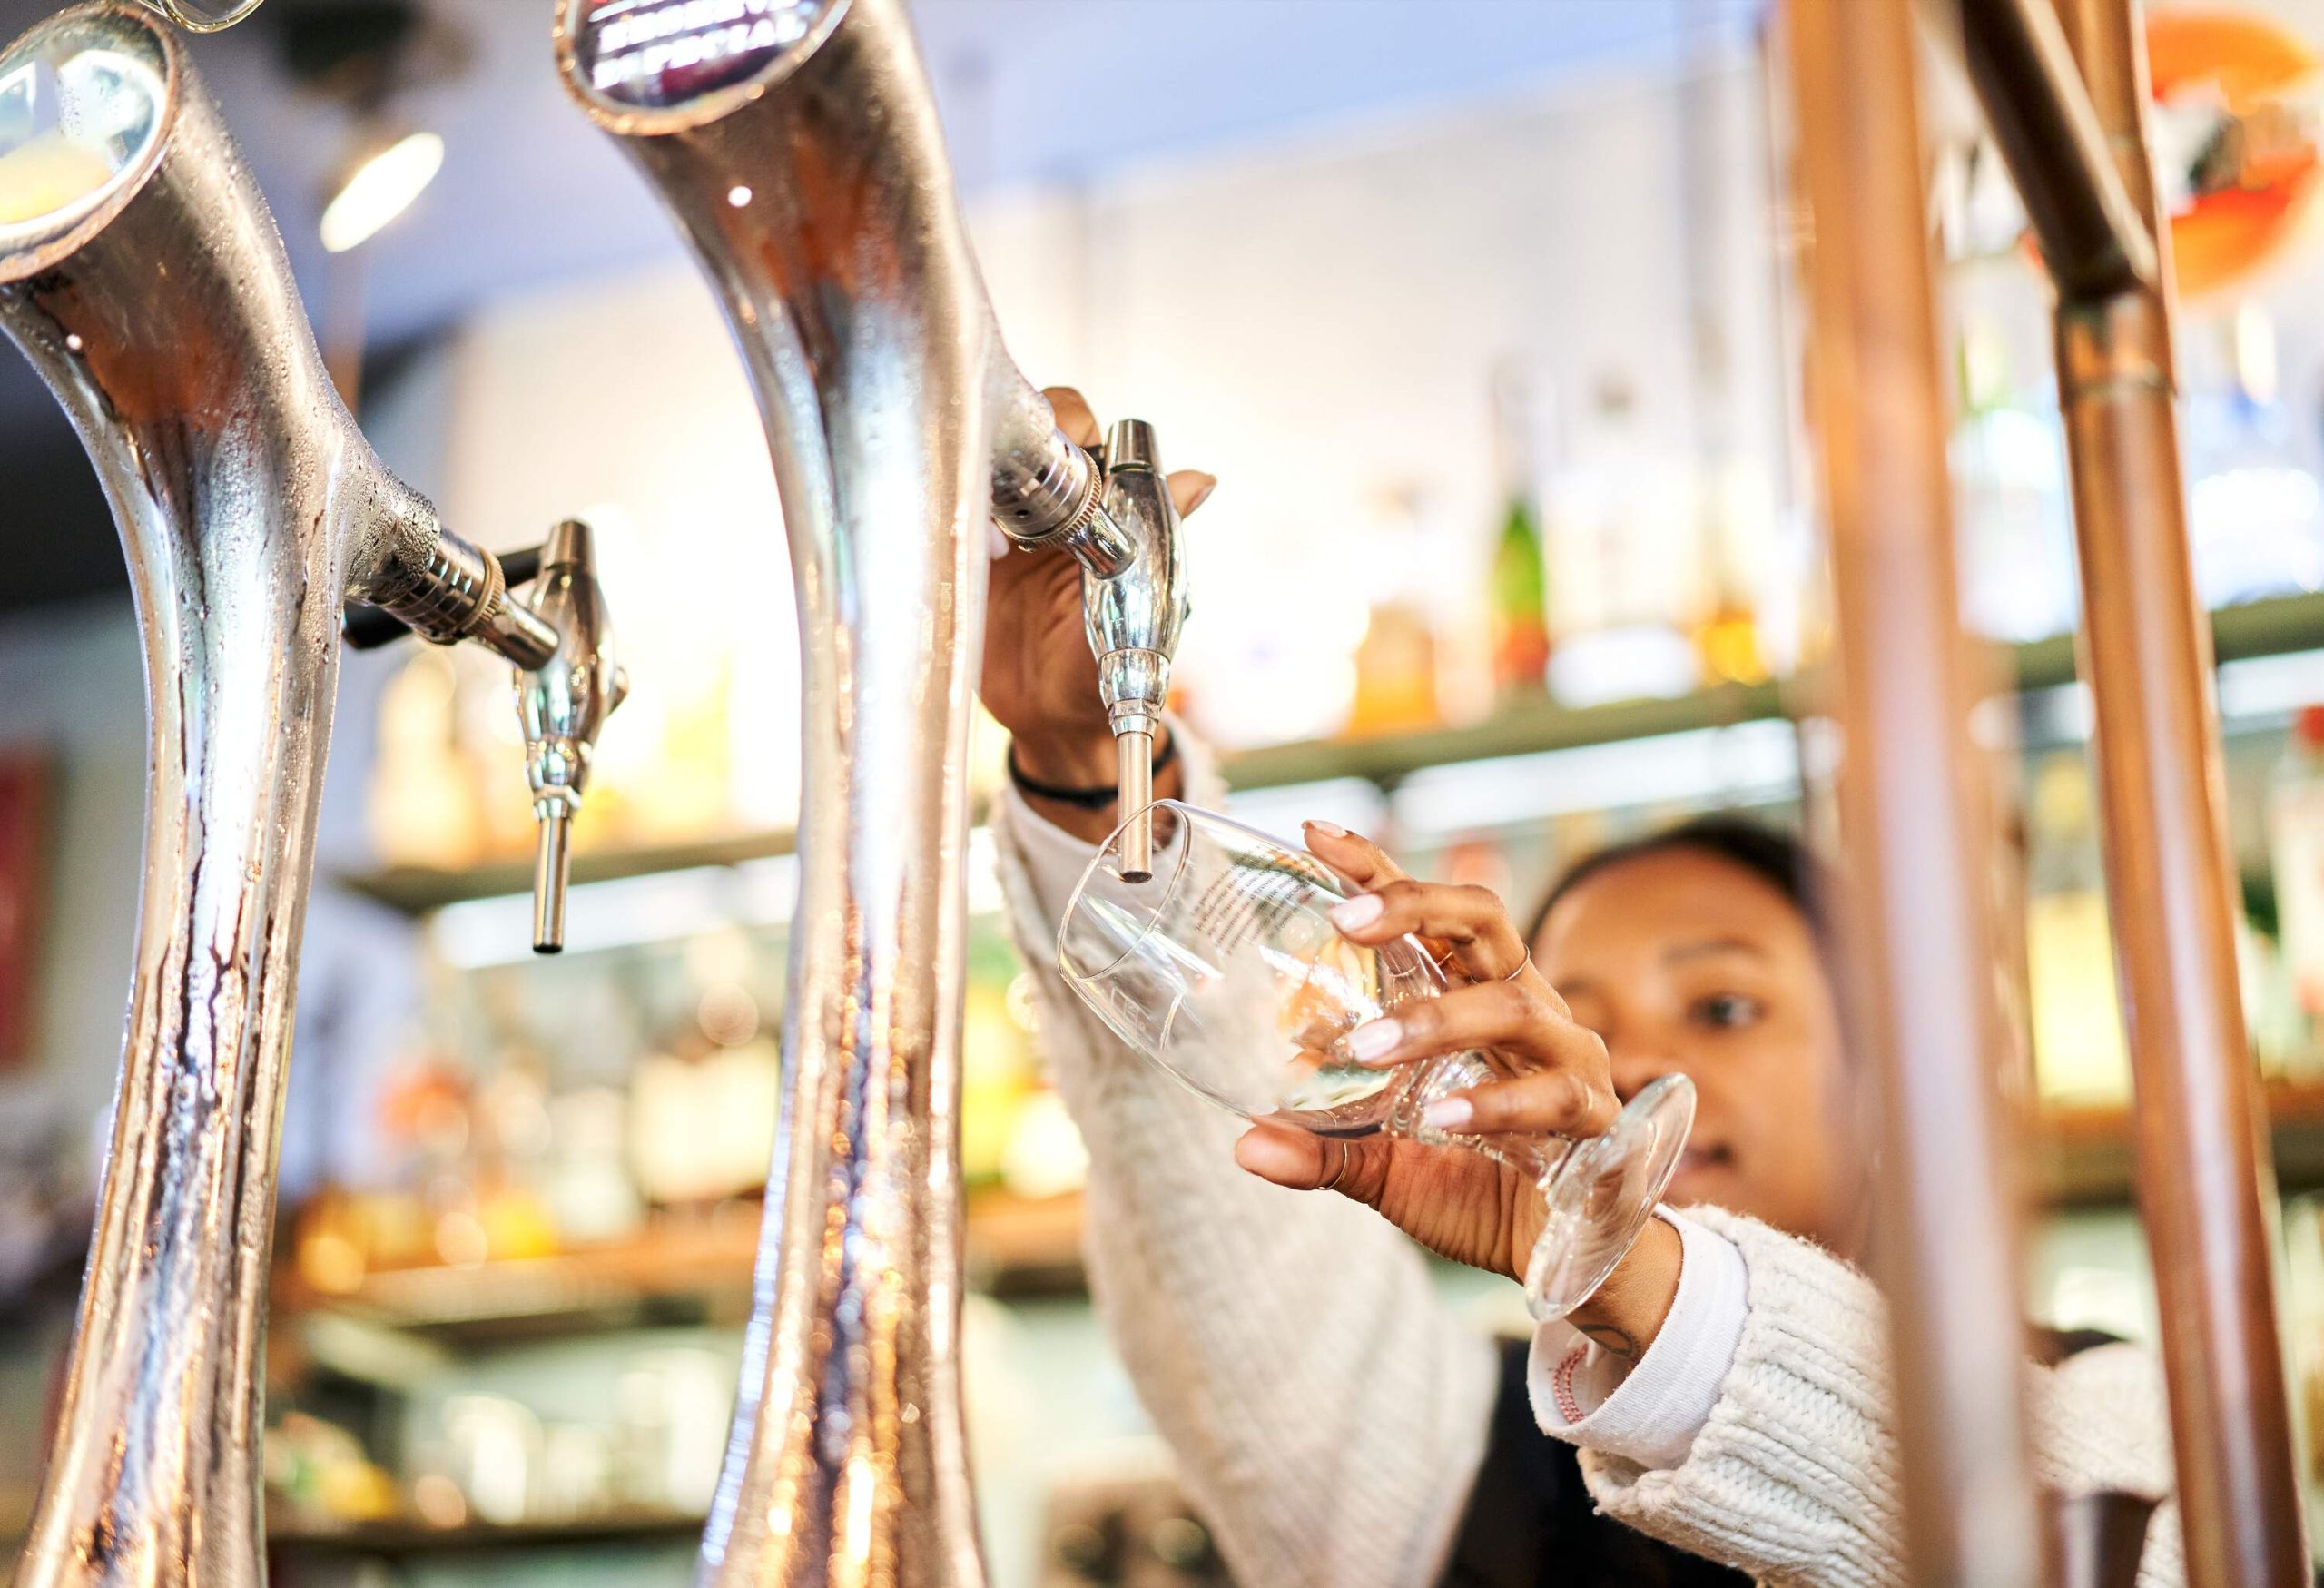 A young lady fills a glass on a beer tap.